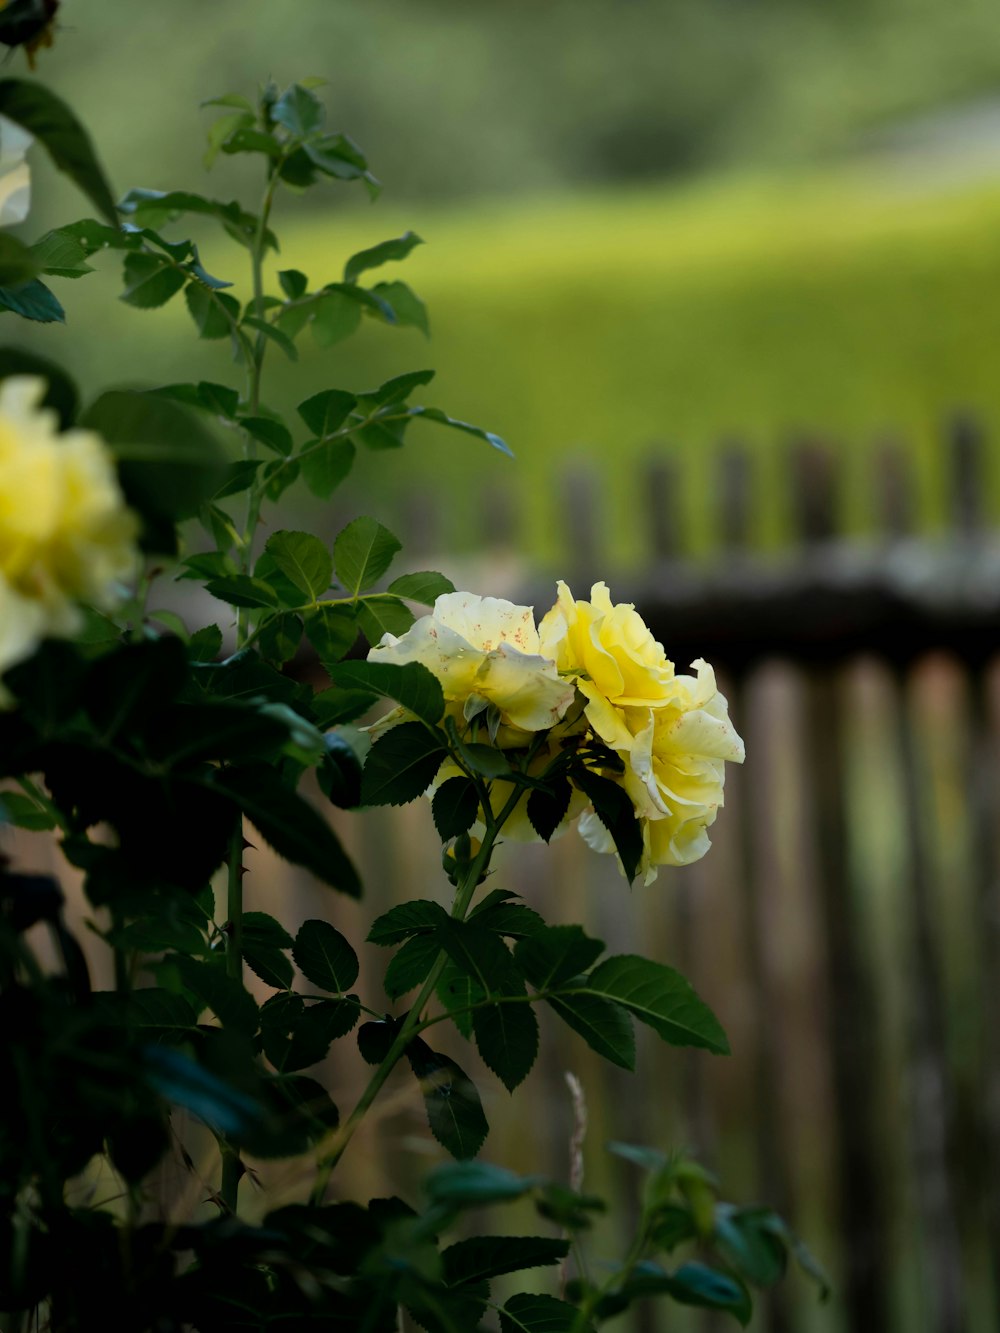 a bush with yellow flowers in front of a fence